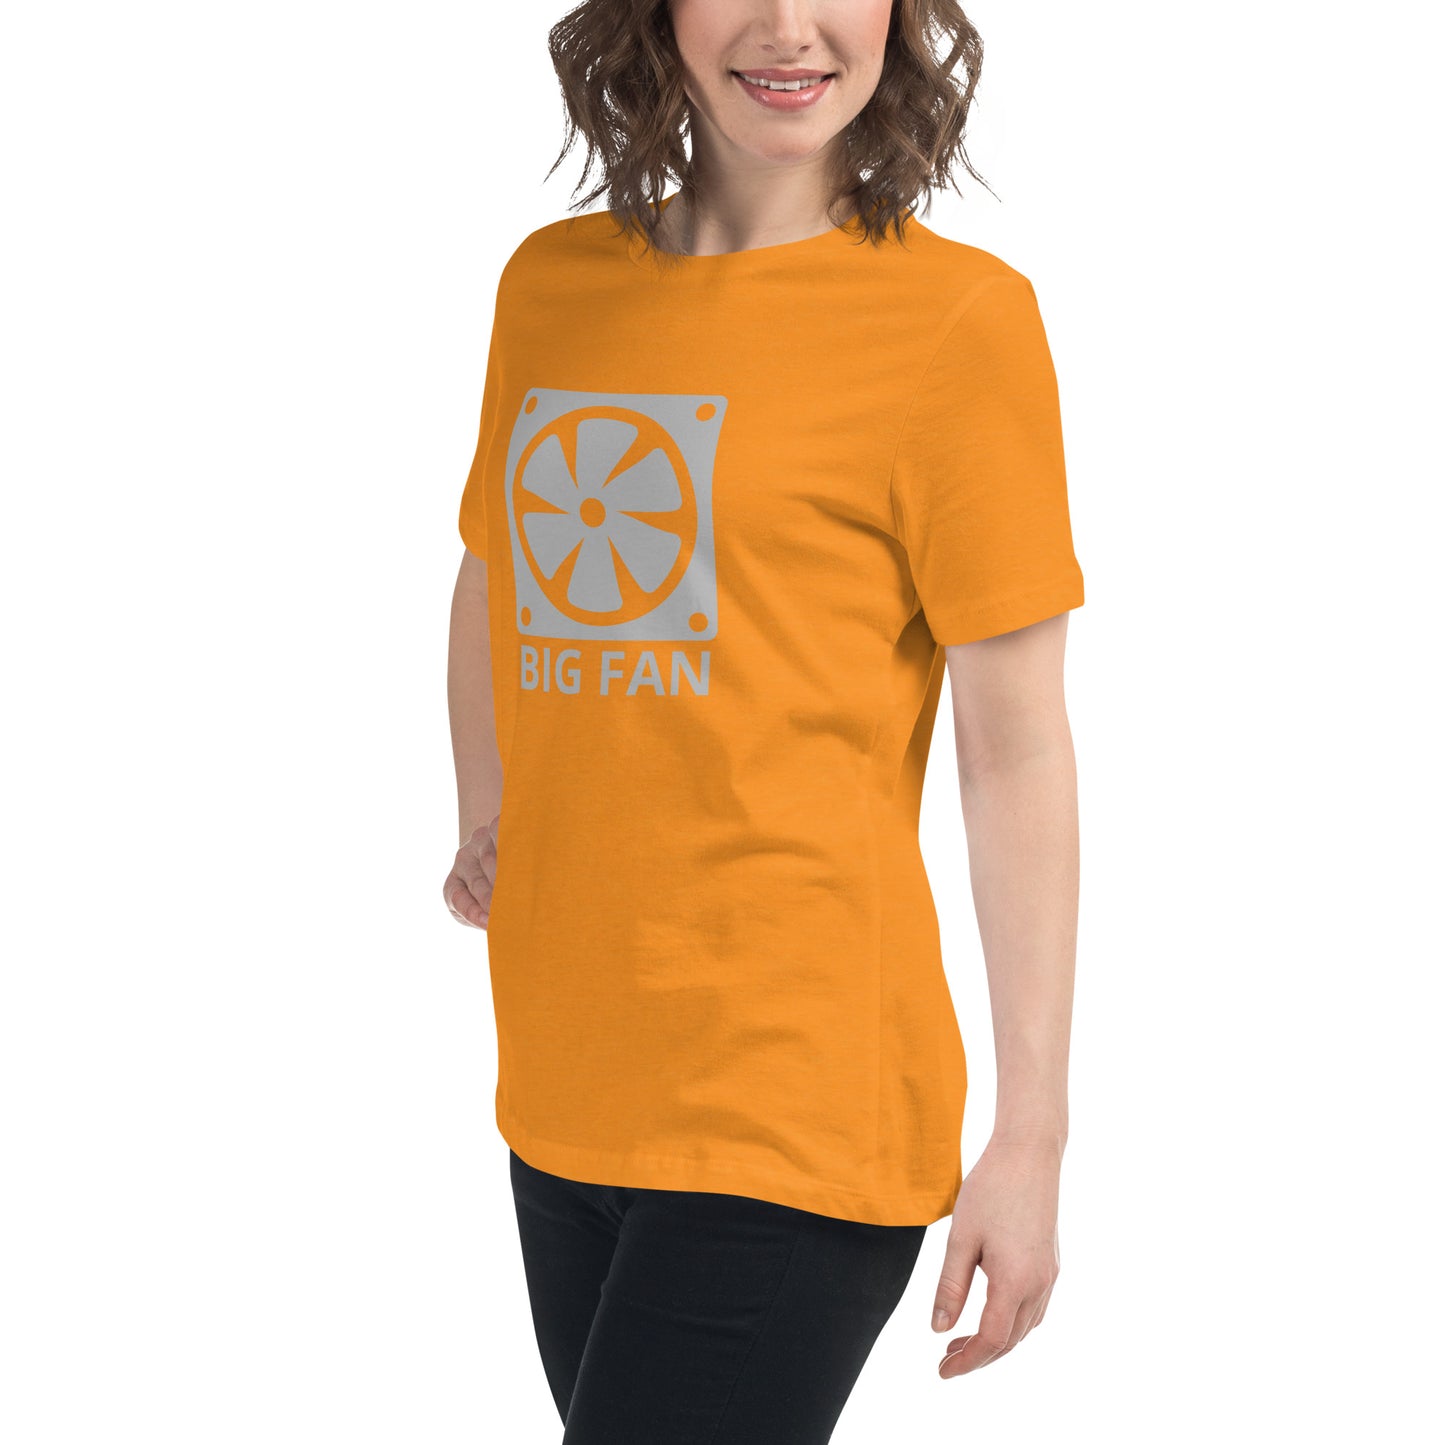 Women with marmalade t-shirt with image of a big computer fan and the text "BIG FAN"